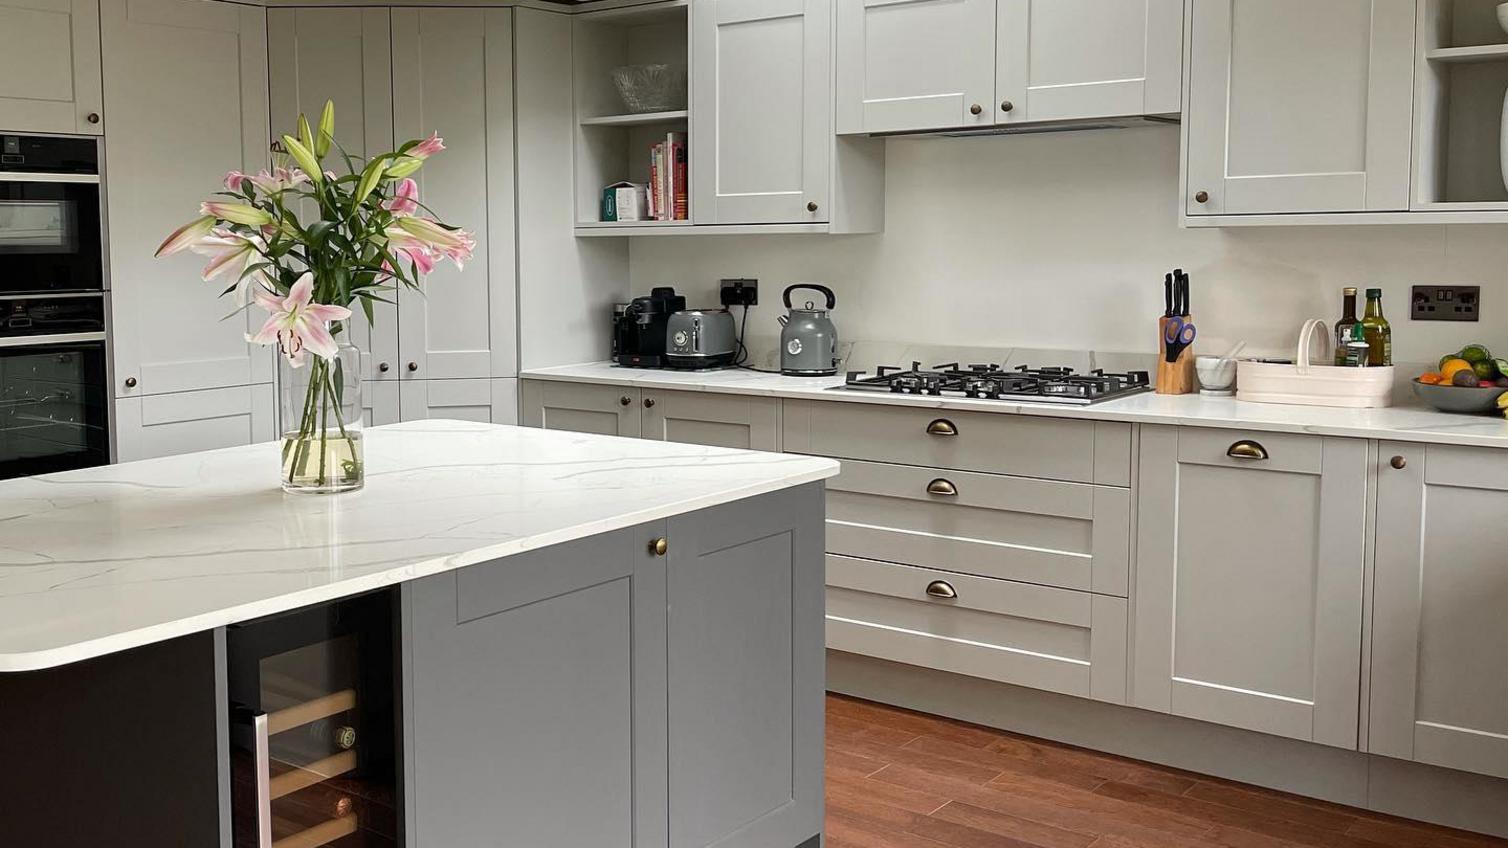 Light and dark grey kitchen design with shaker doors, silver cup and knob handles, white marble worktops.